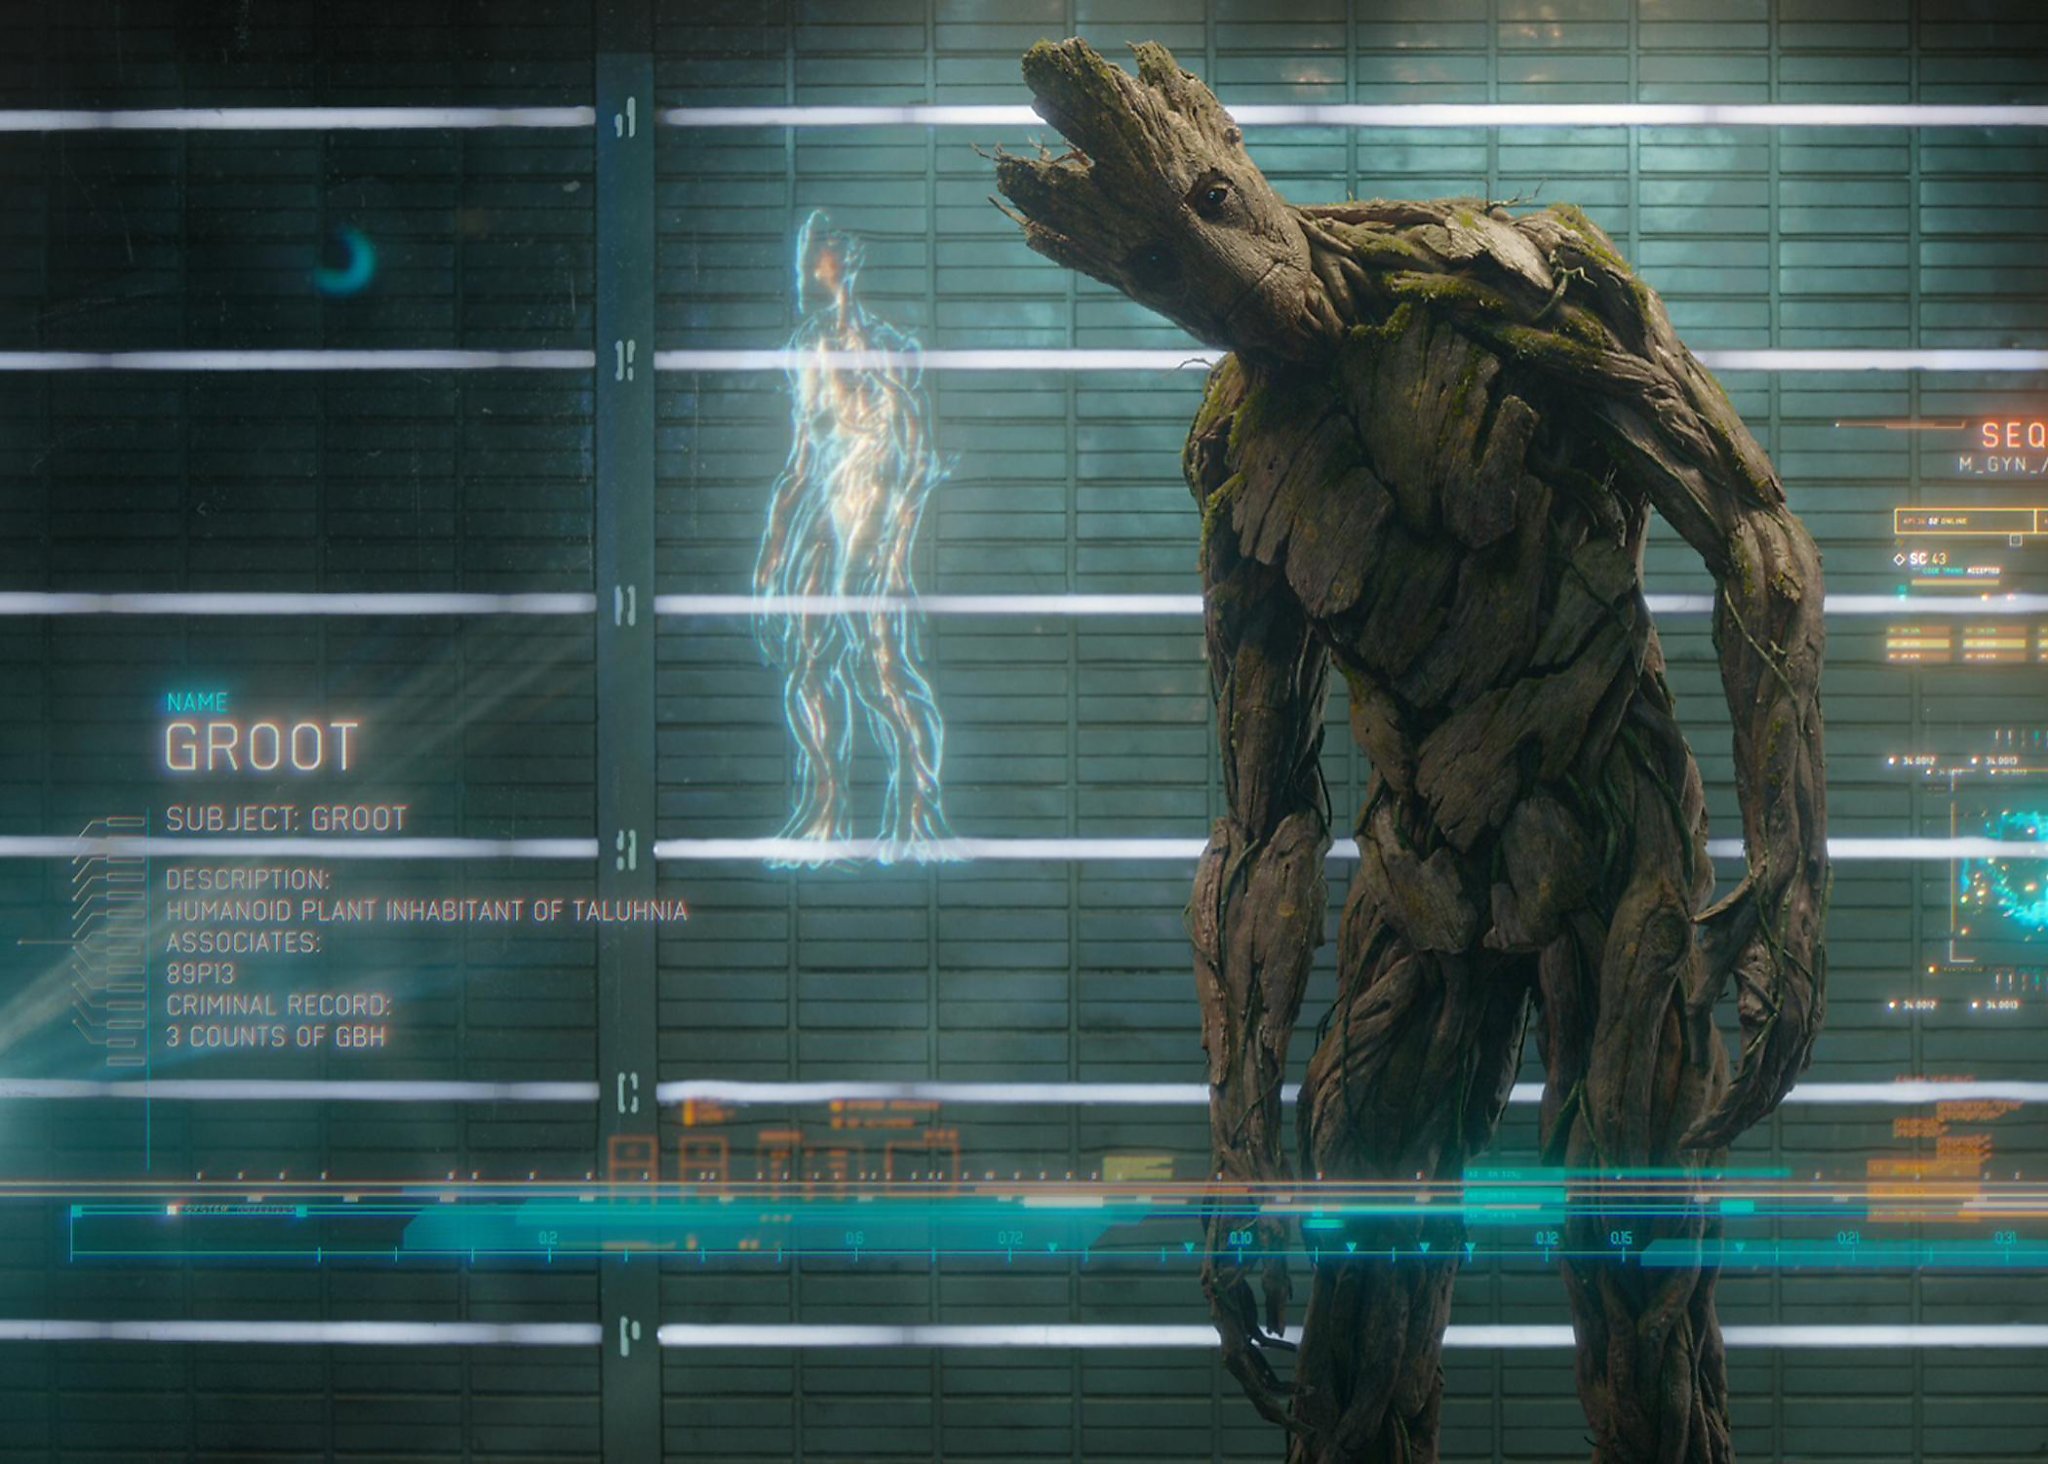 Texas student's 'I am Groot' cover letter and resume goes viral - Houston Chronicle2048 x 1464